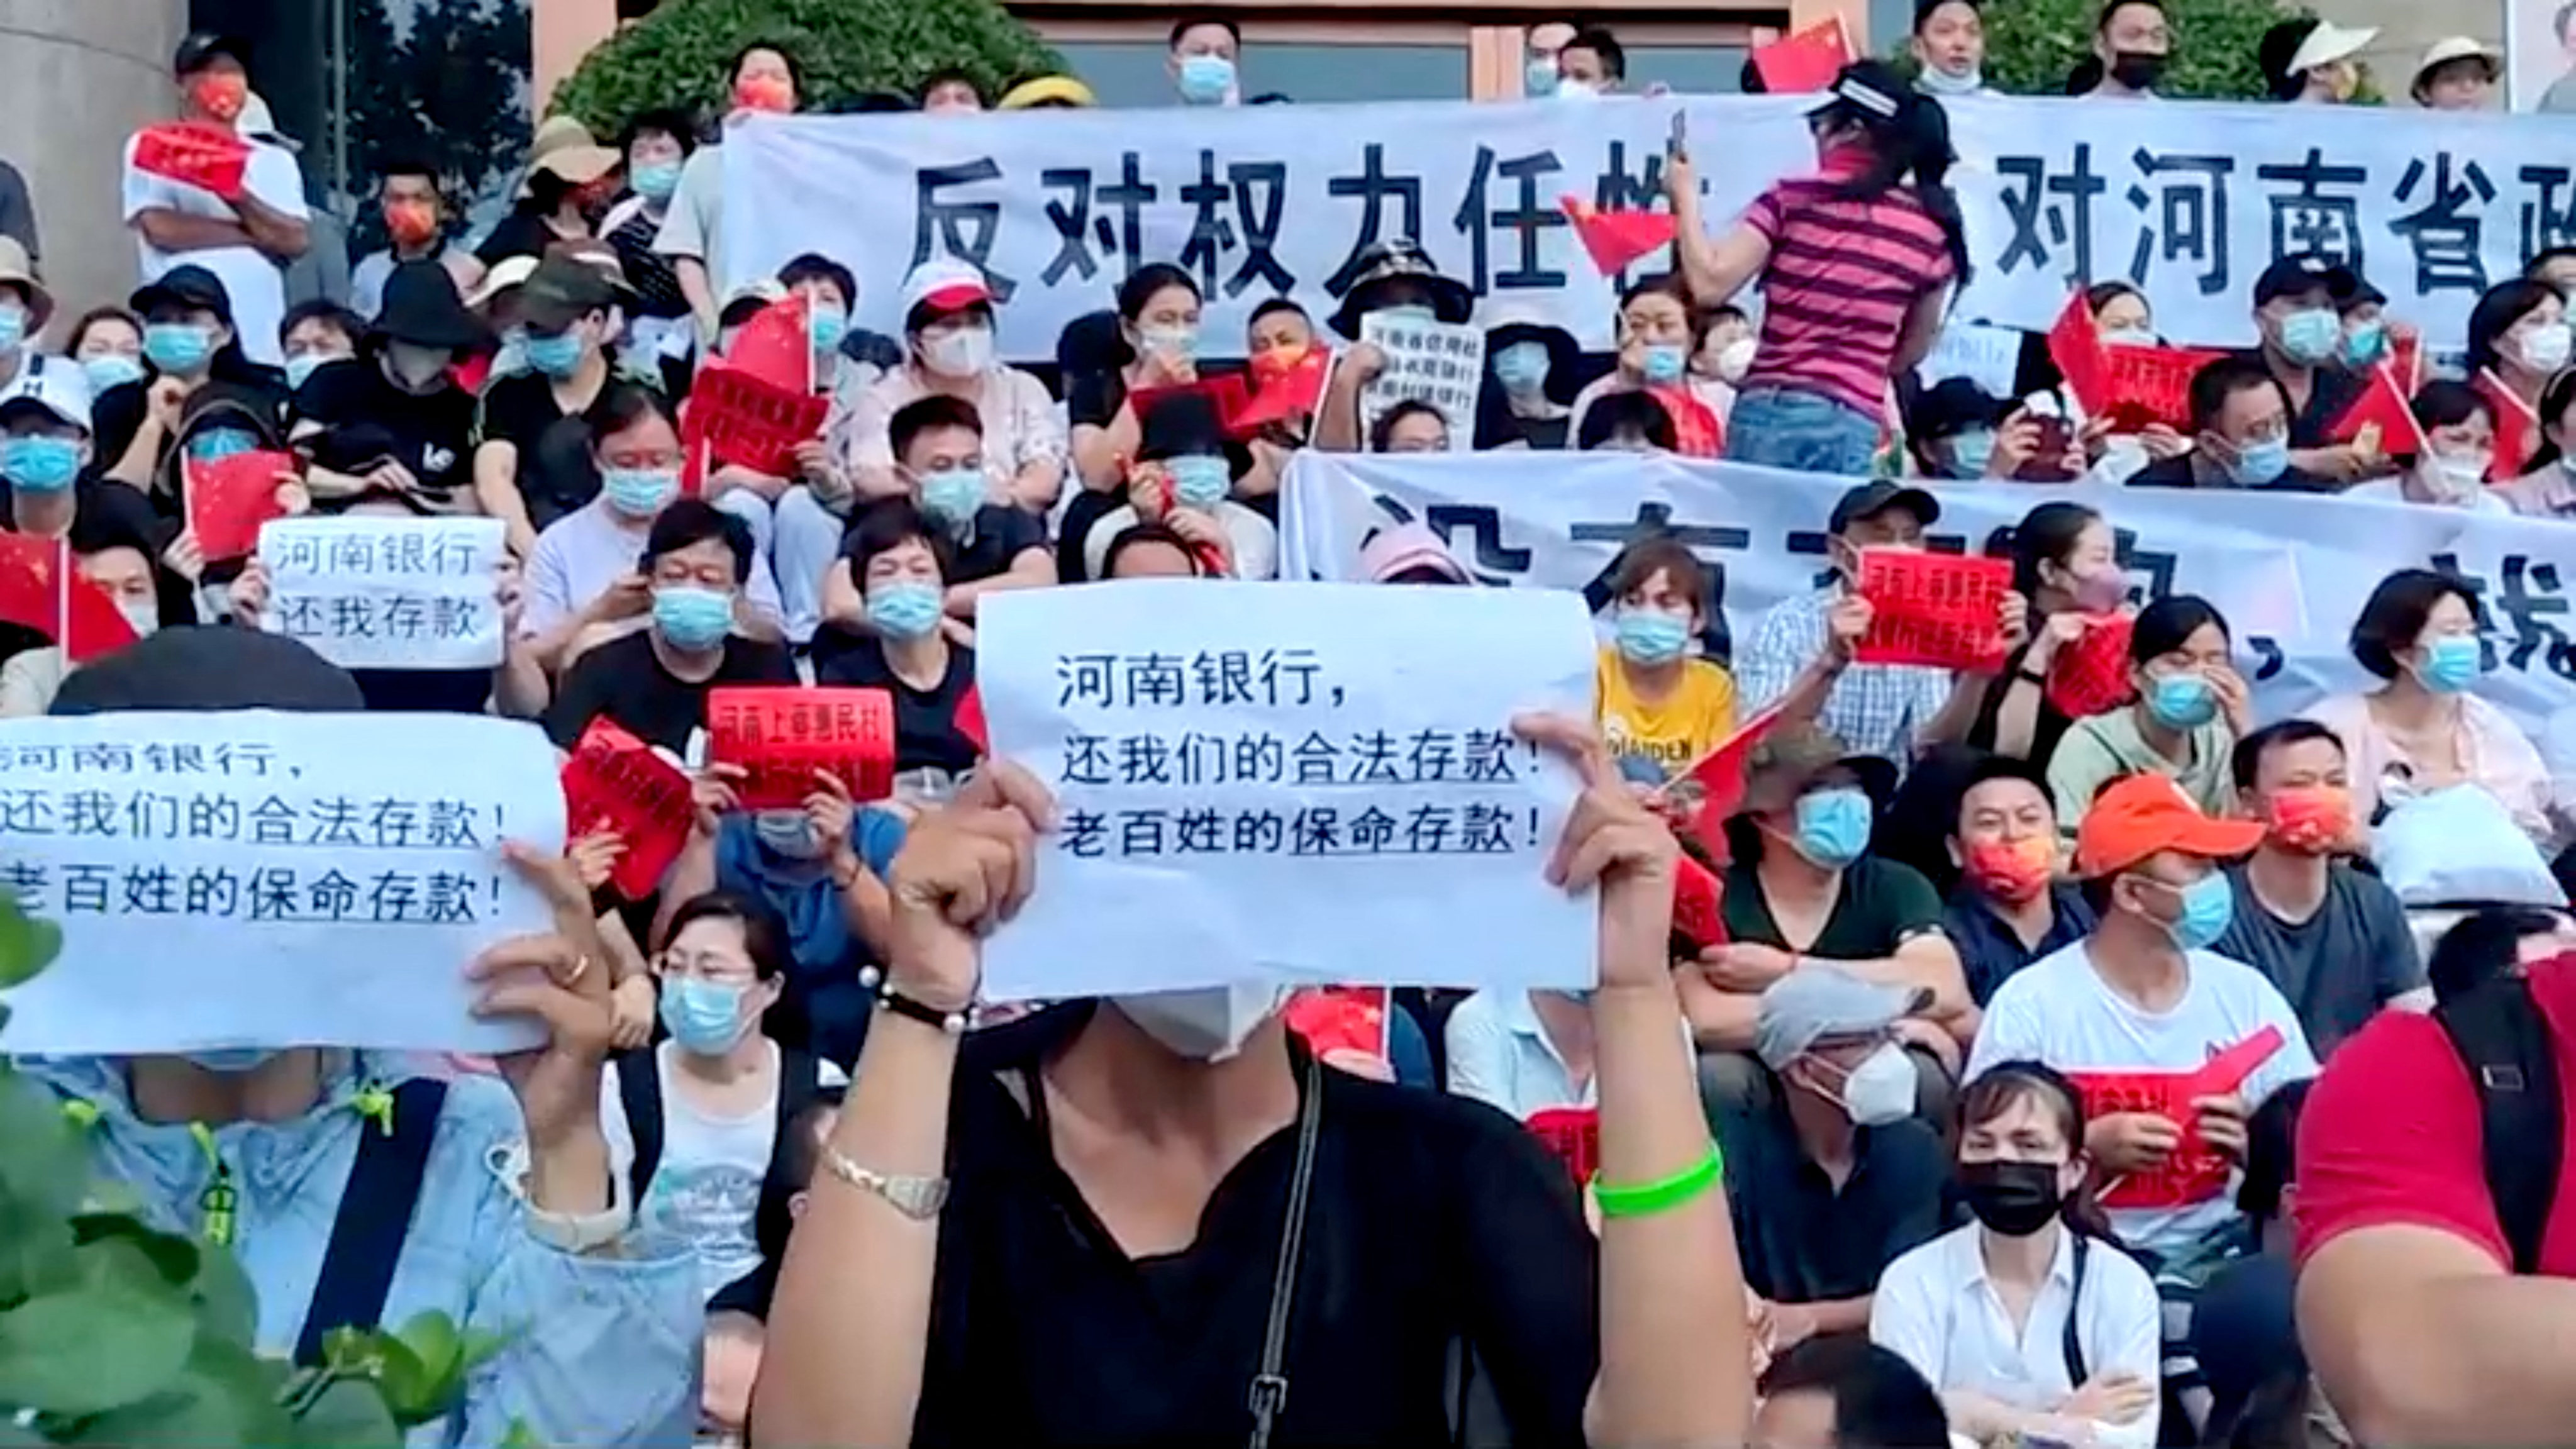 Bank customers stage a protest in Zhengzhou, Henan province, on July 10, after their funds were frozen by local banks. The sign in the foreground reads: “Henan Bank, return to us our legal deposits! The people’s life-saving deposits!” Photo: Reuters